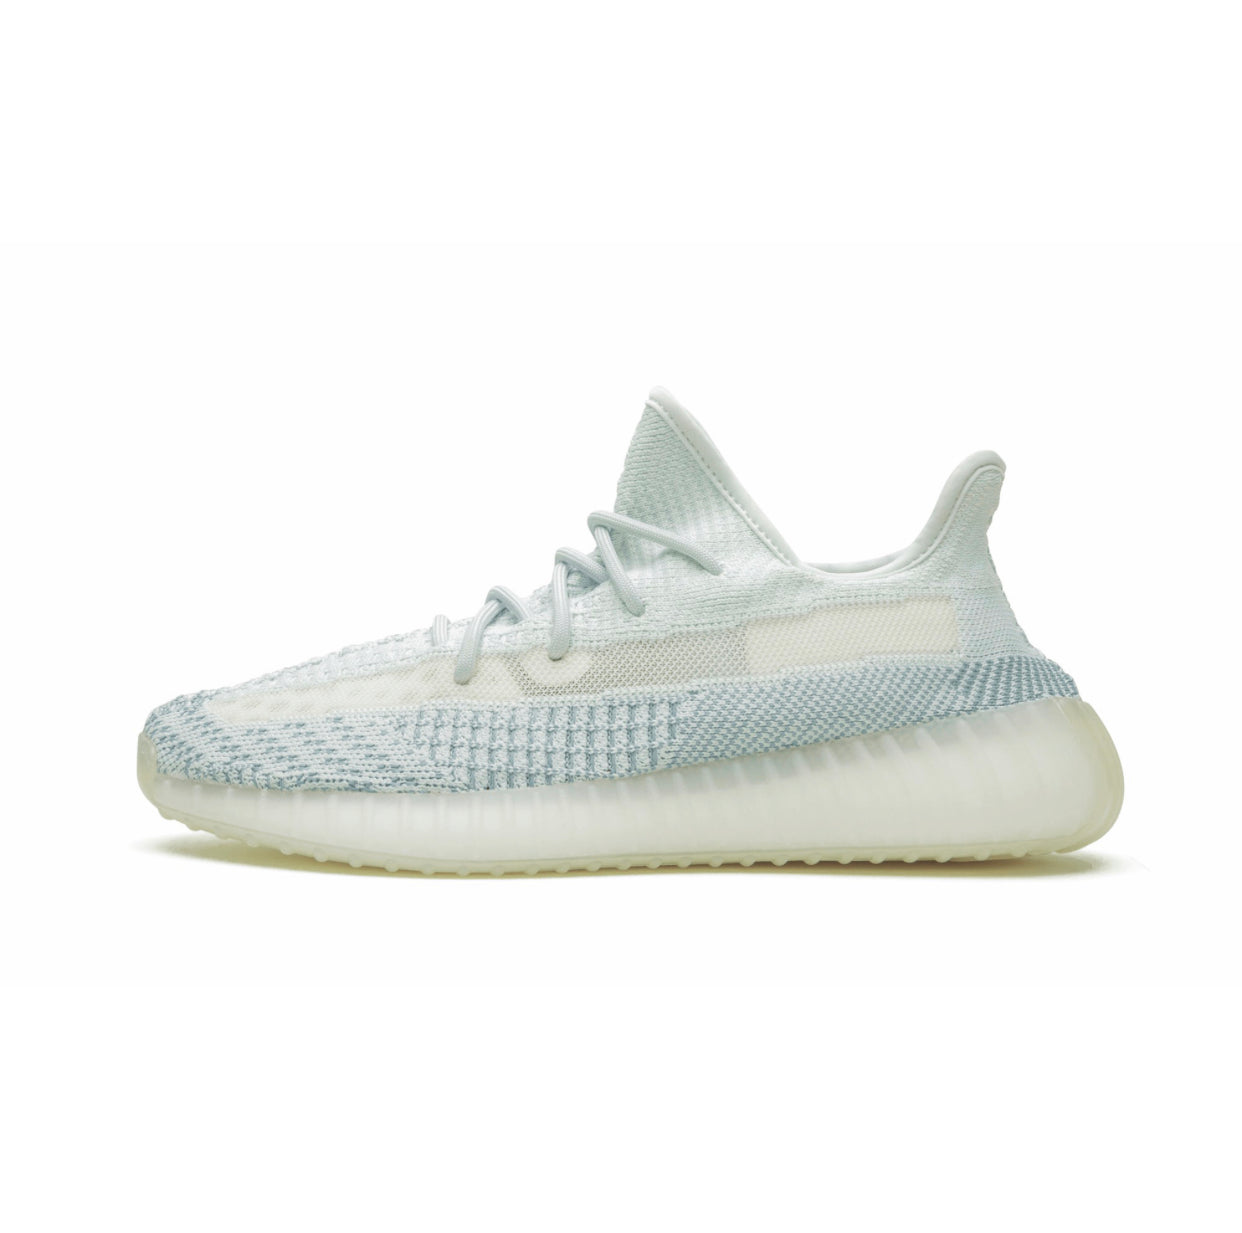 Yeezy Boost 350 V2 Cloud White – Reflective